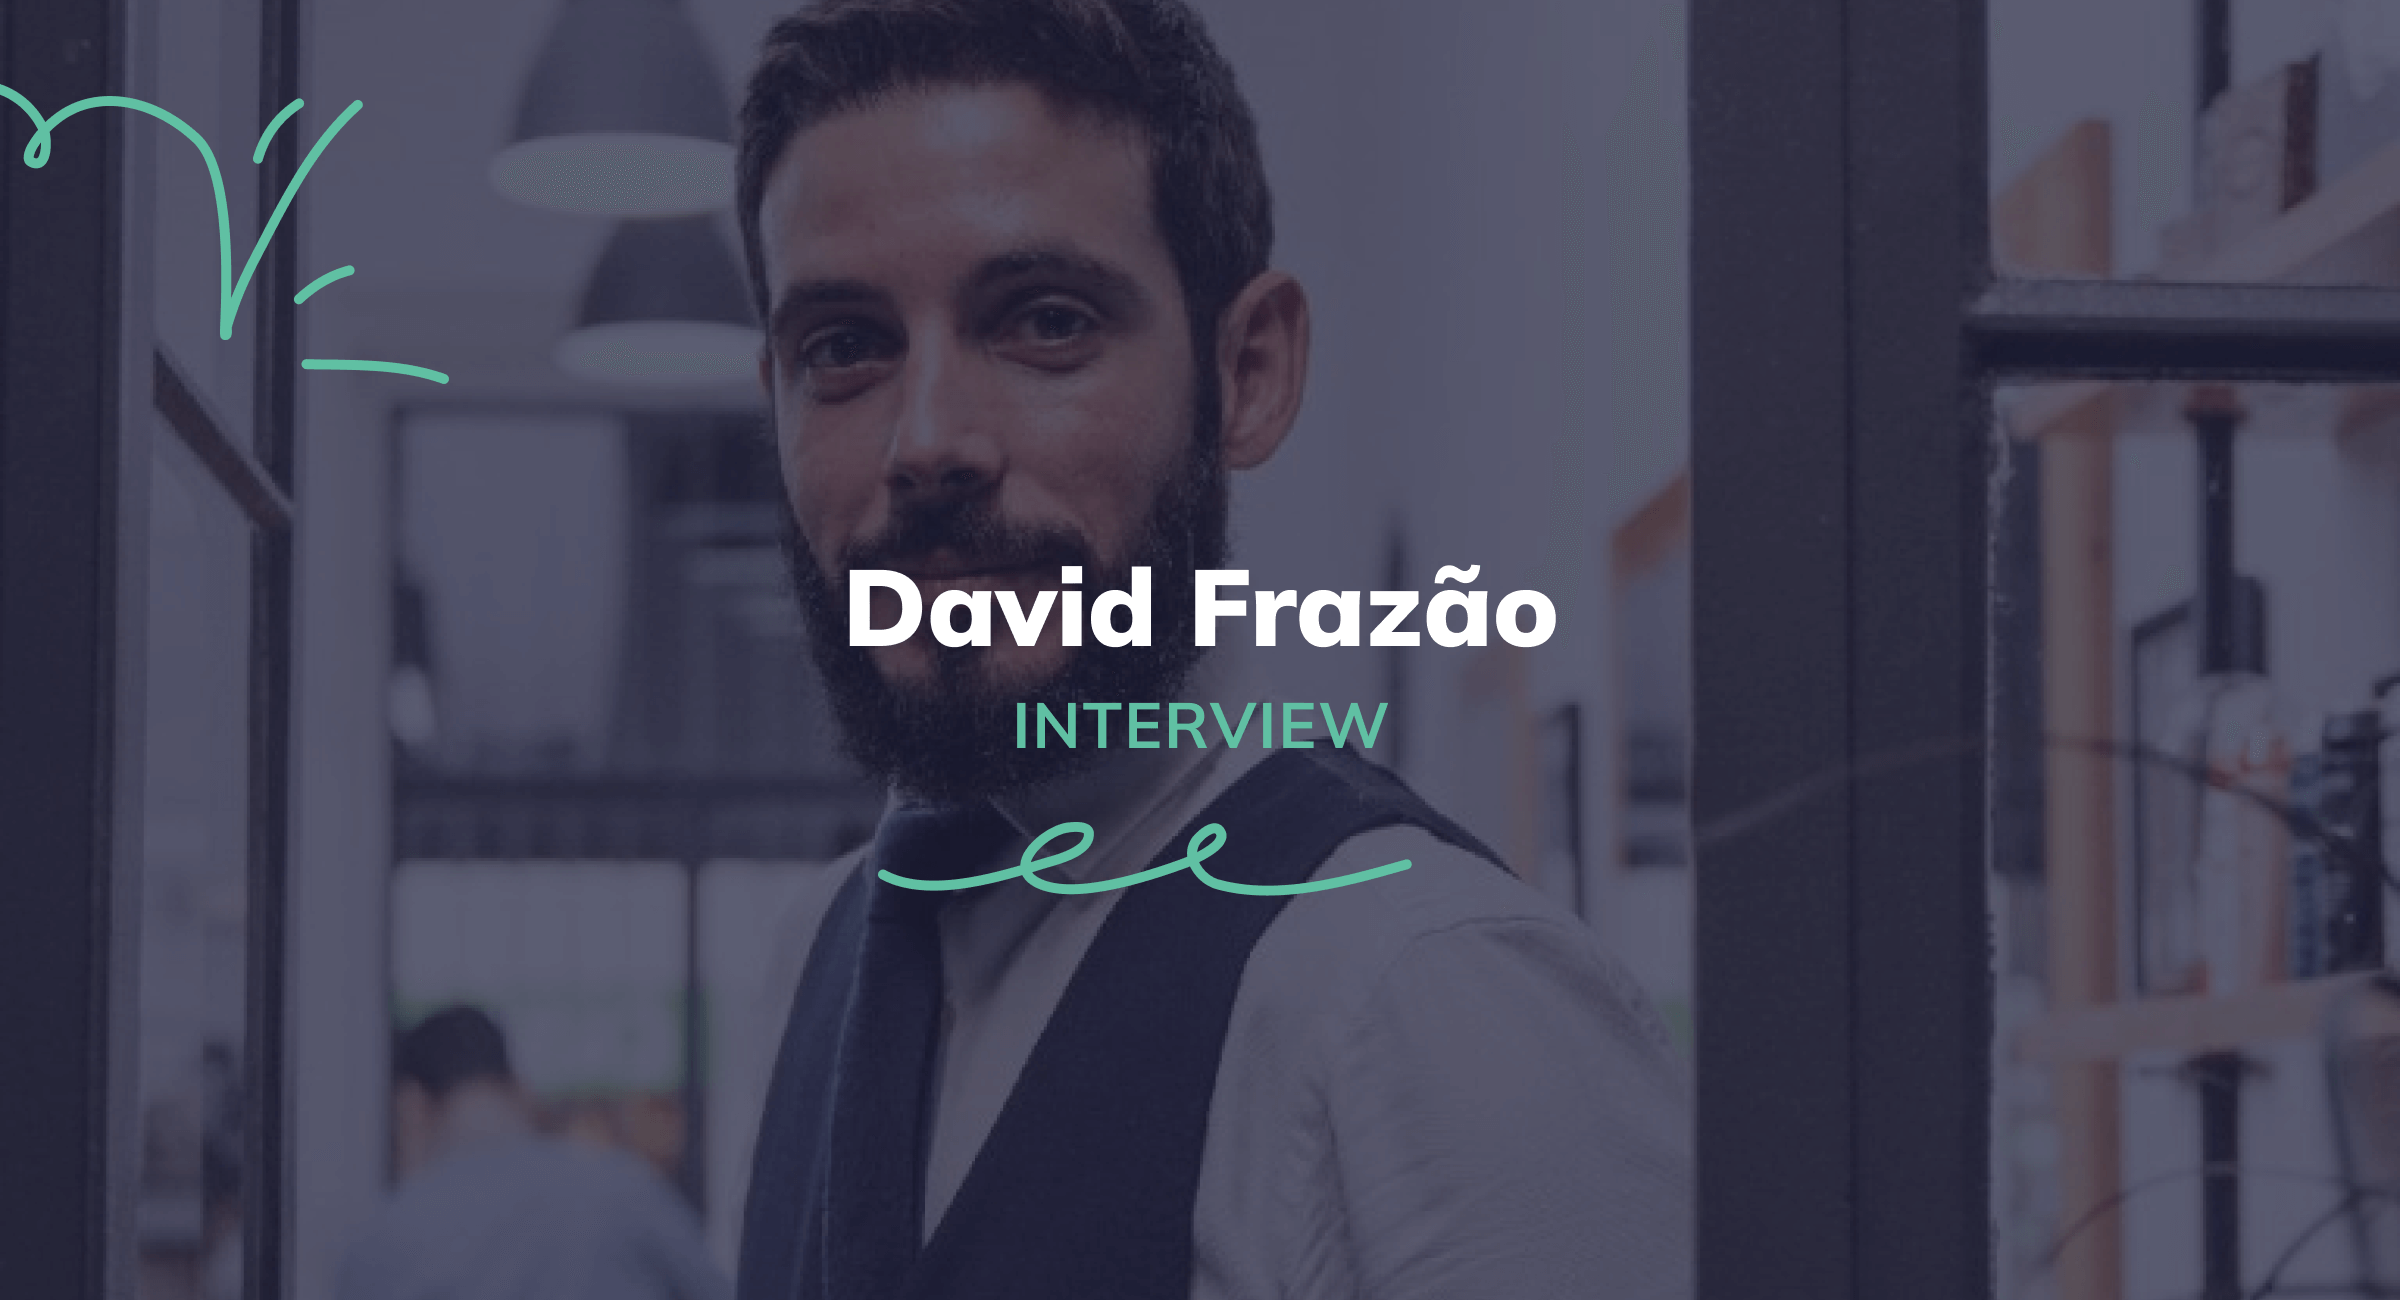 Chatting with David Frazão from Bento Barbearias